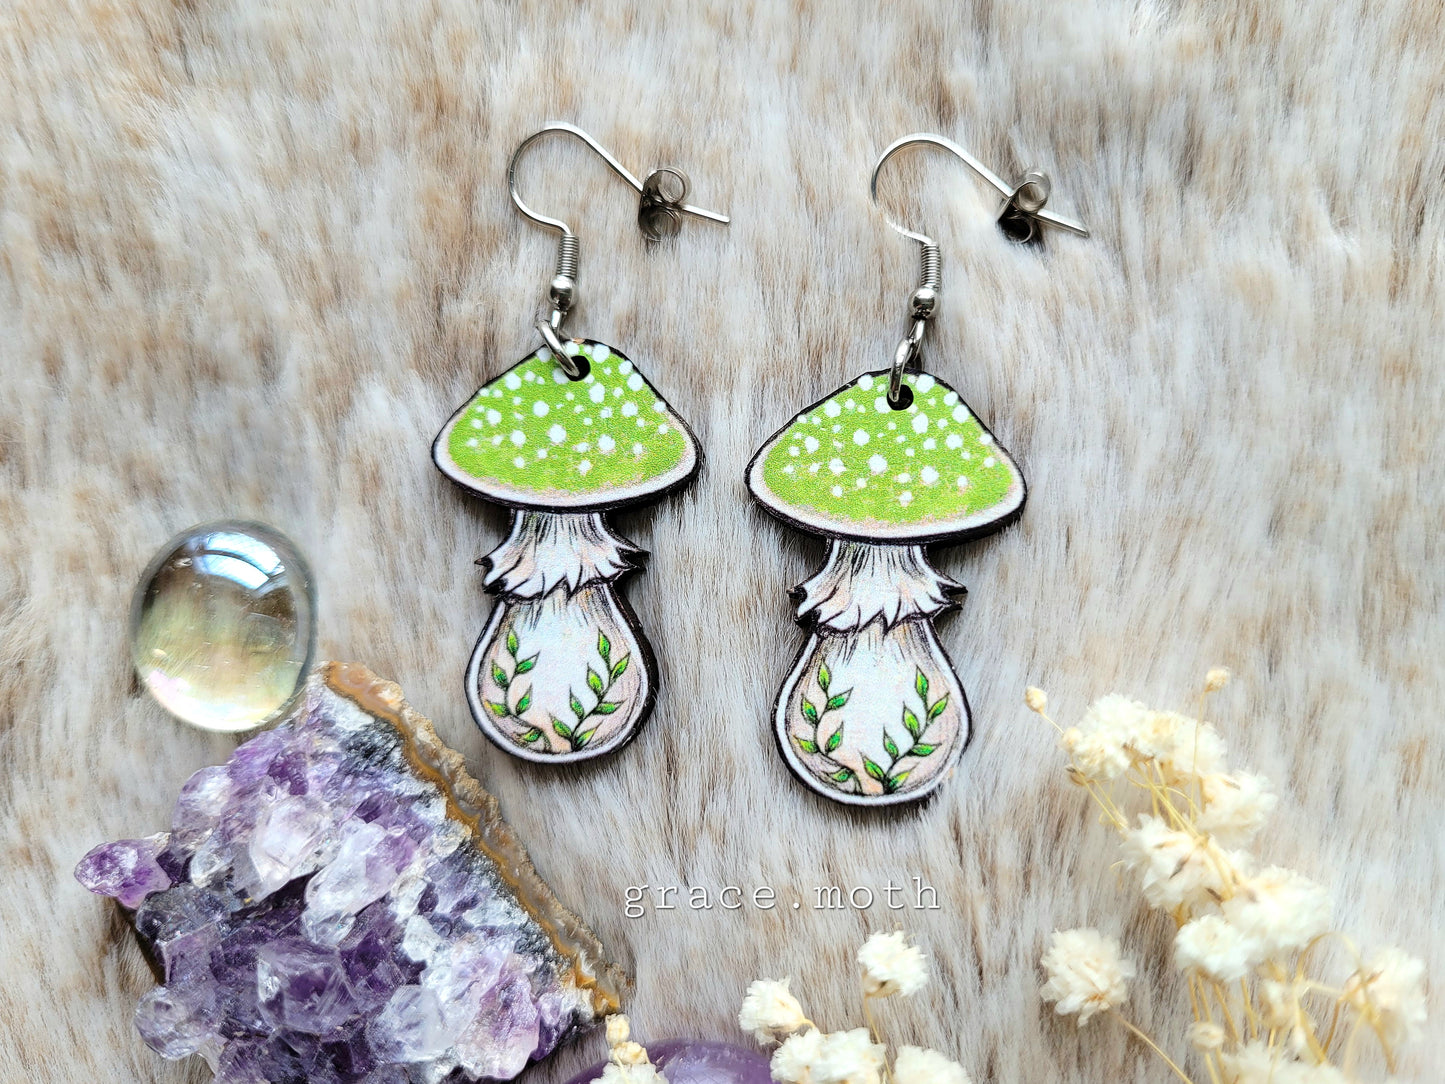 Green Mushroom illustrated earrings - responsibly sourced cherry wood, 304 Stainless Steel hooks, by Grace Moth